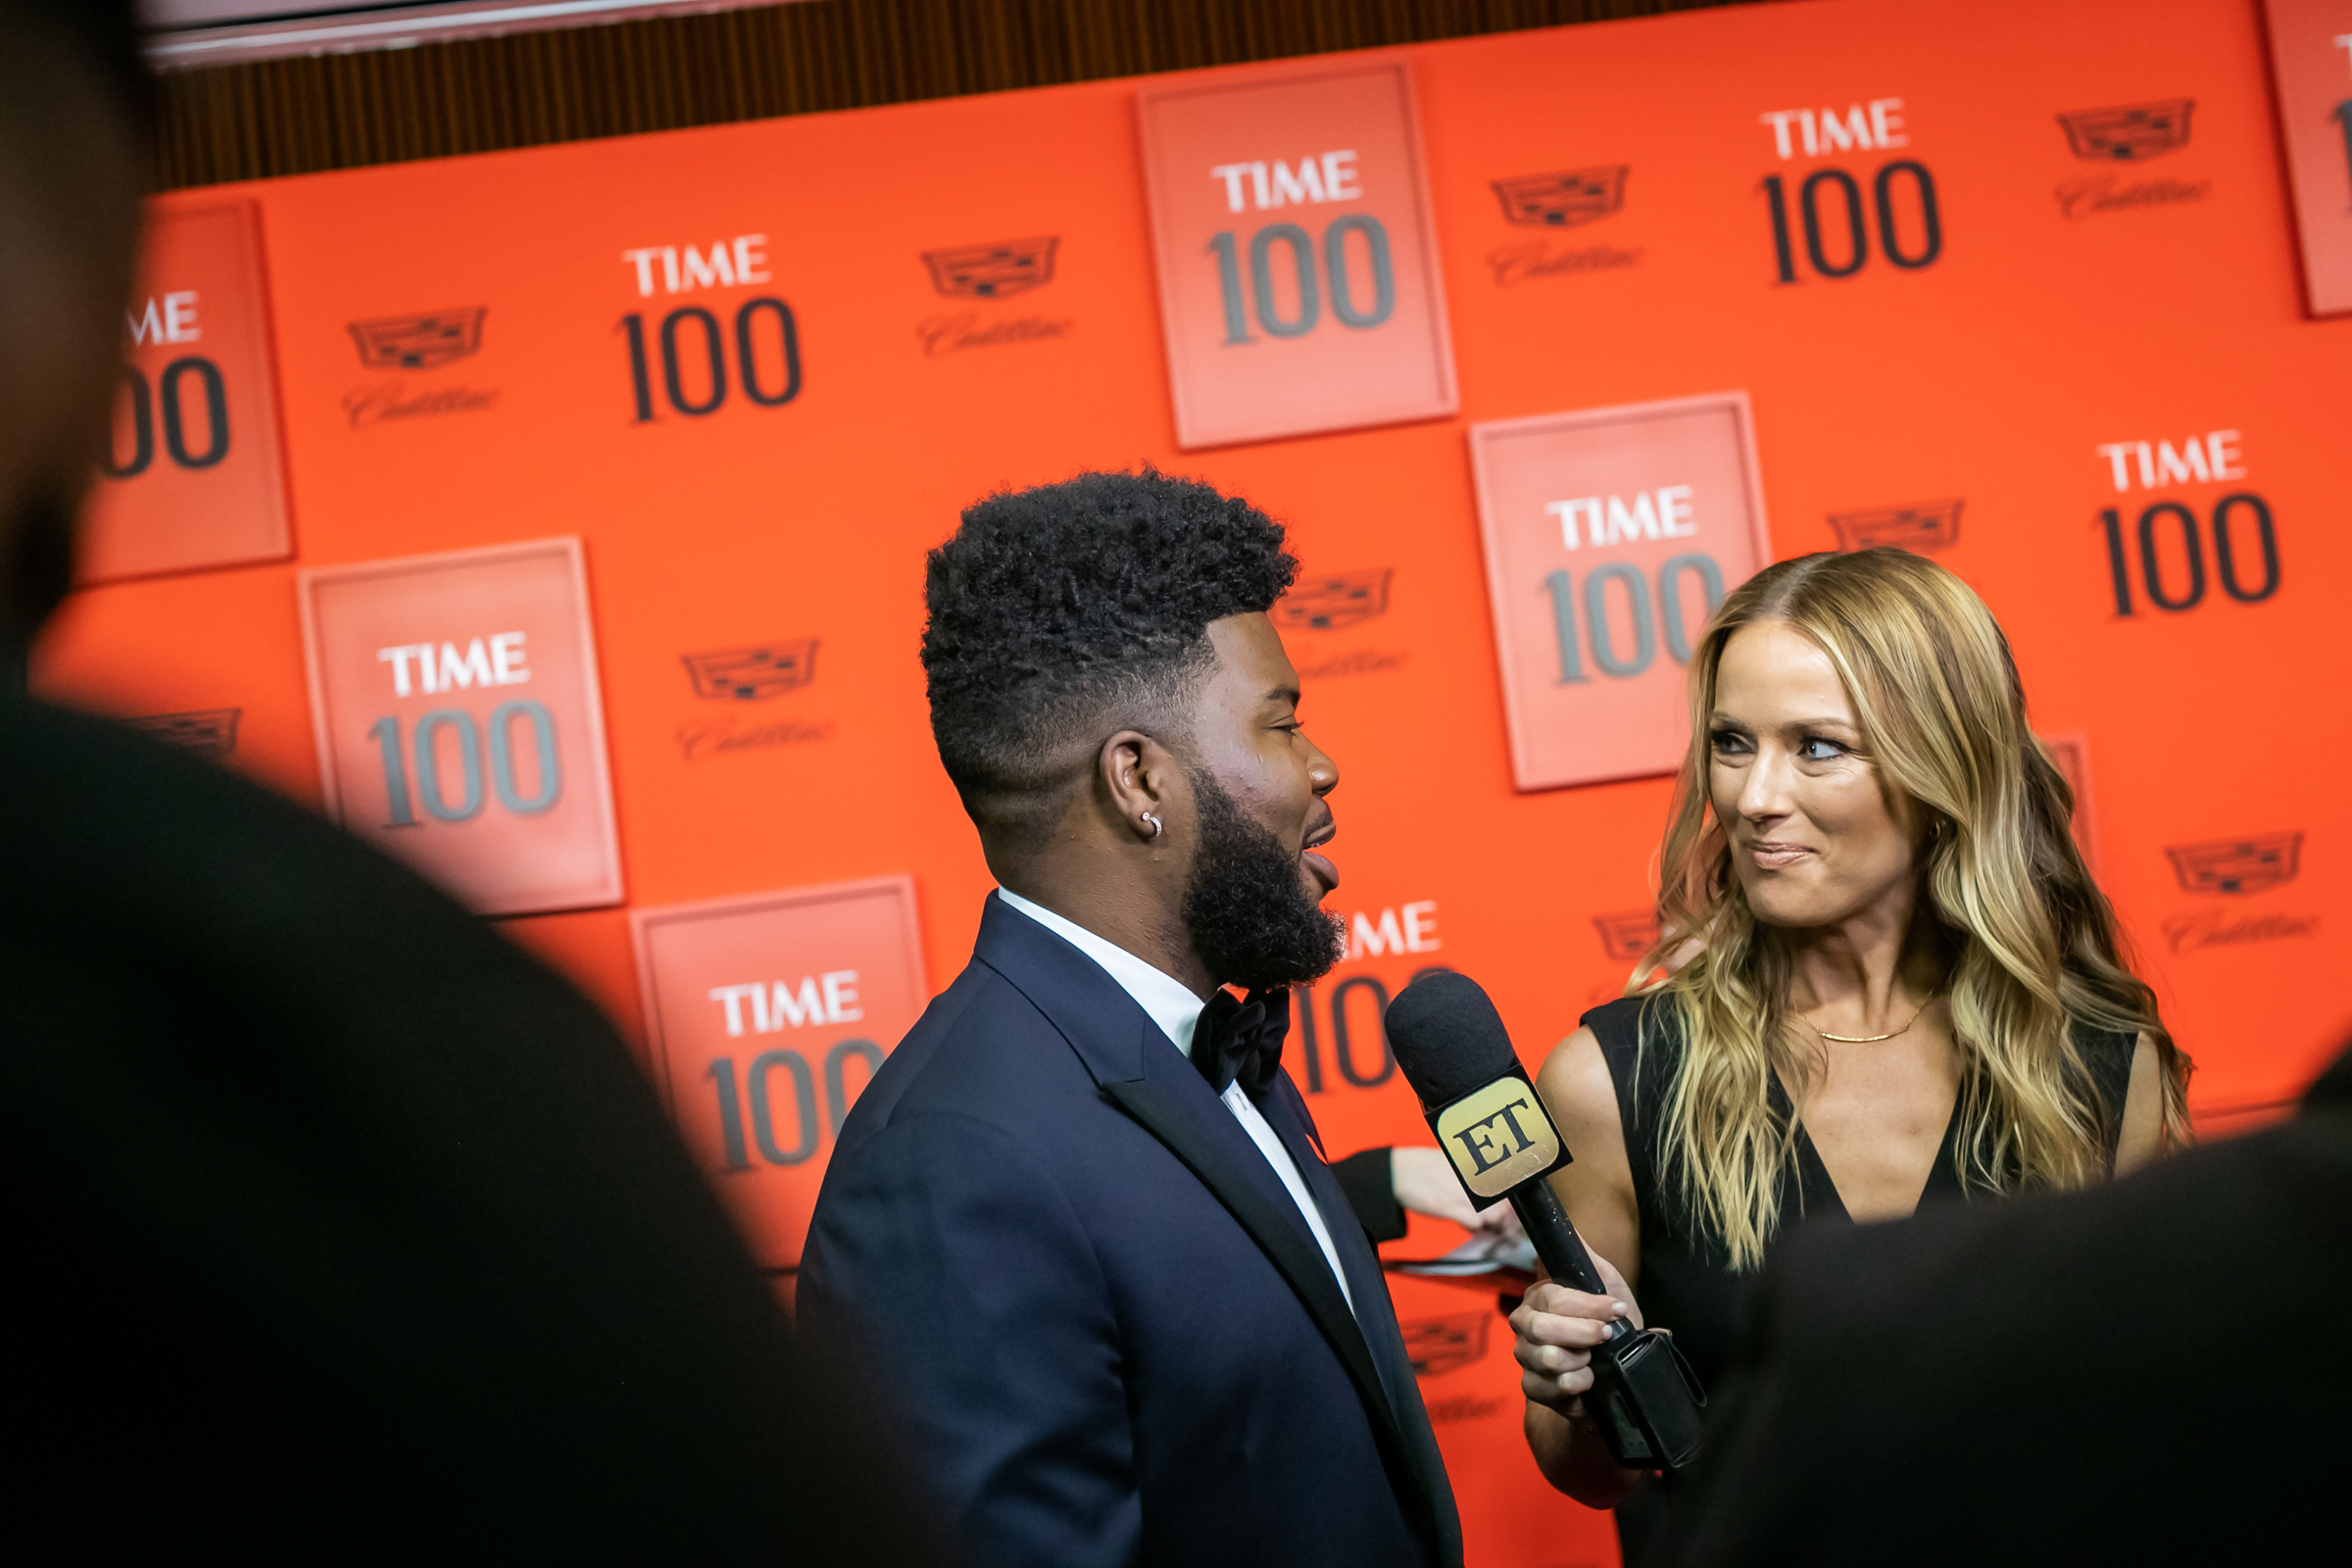 Scenes from the 2019 Time 100 Gala in New York City